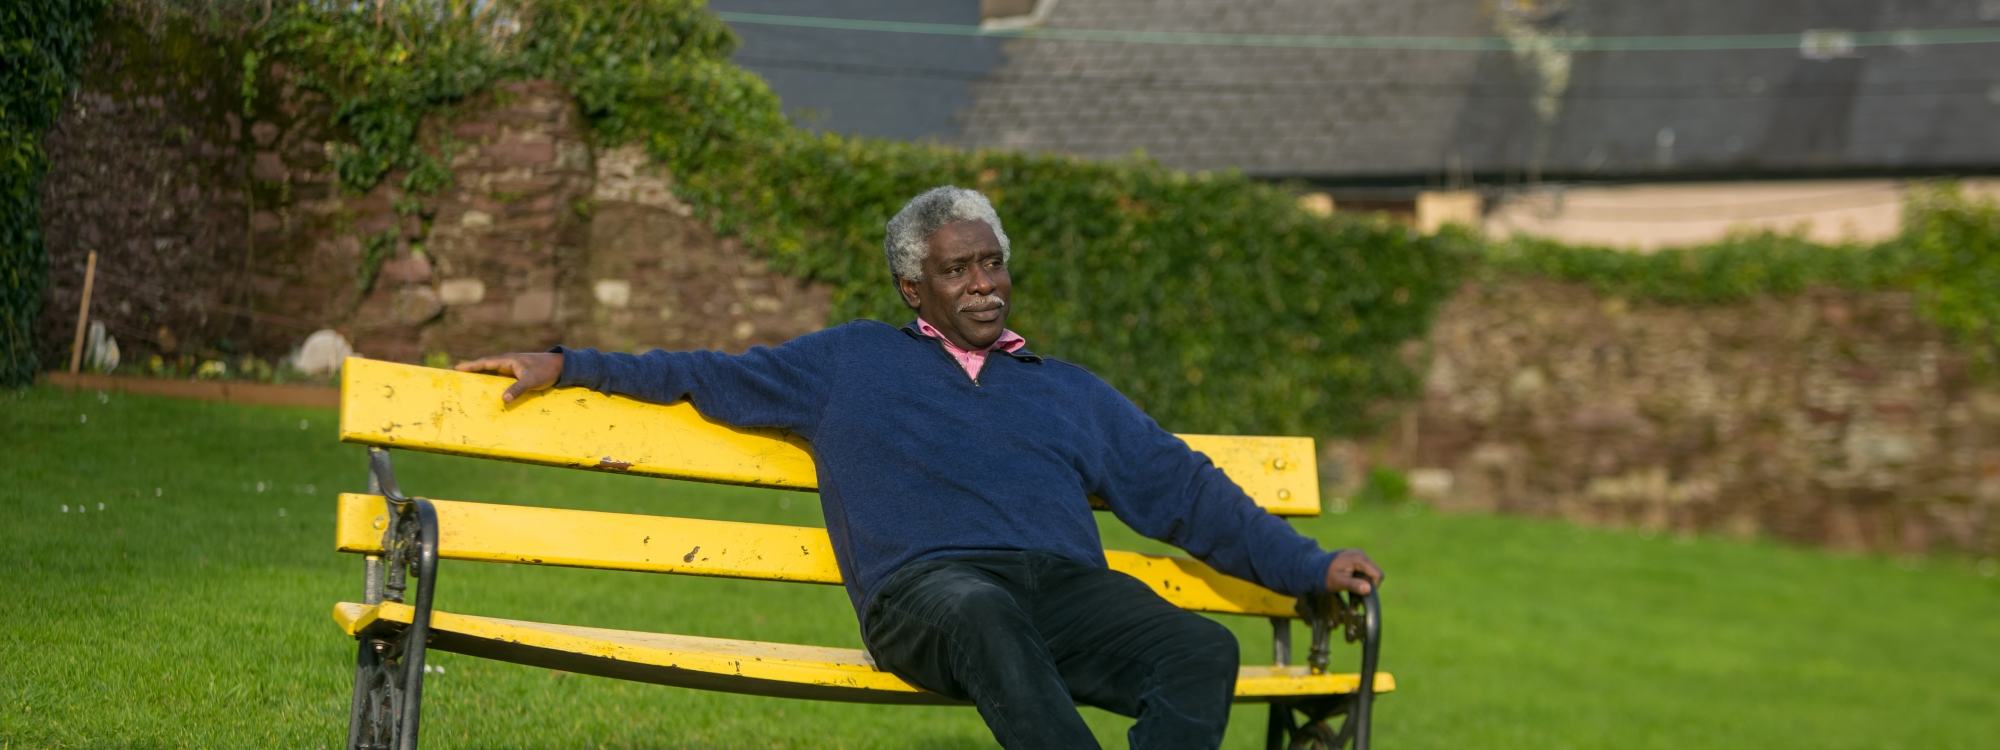 Man sitting on public bench in a park